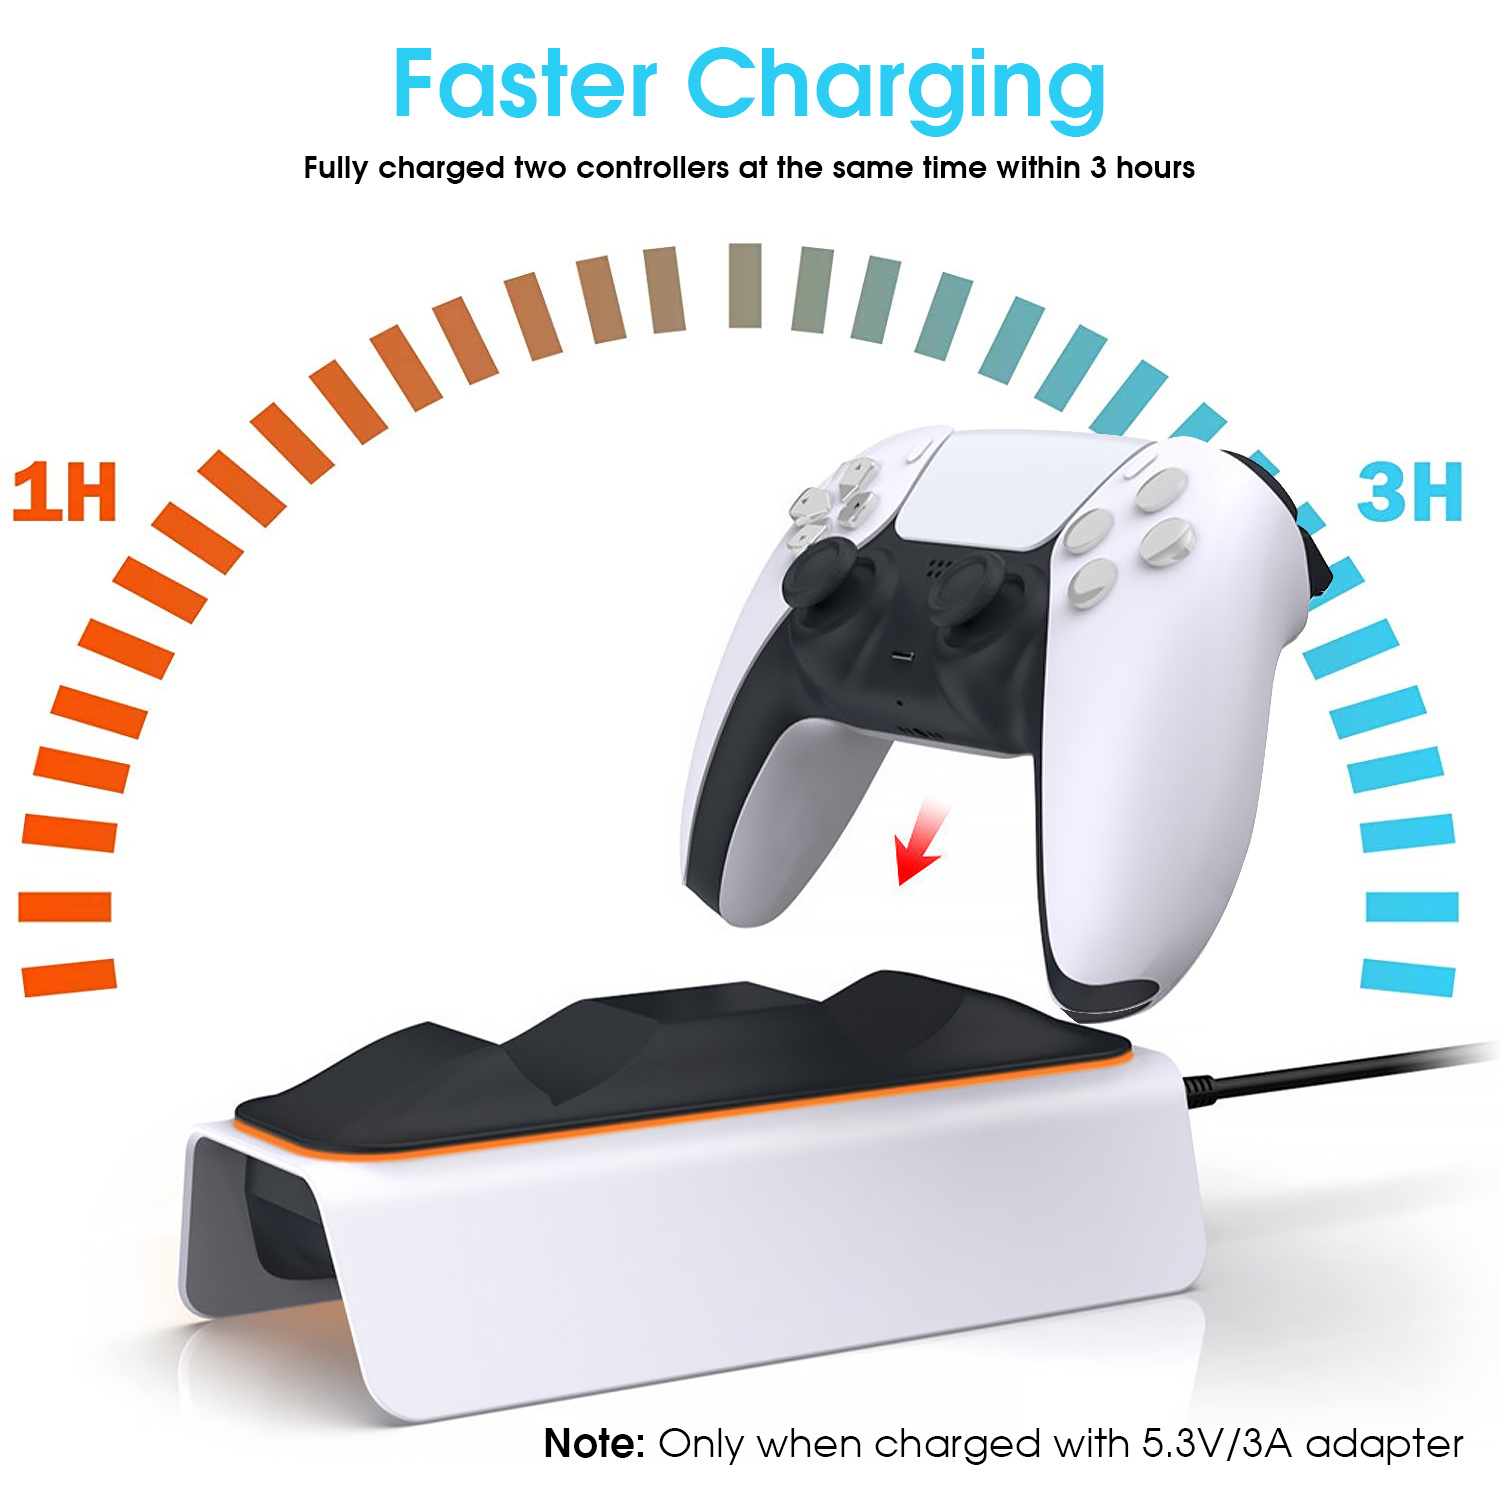 Doosl PS5 Controller Charger Station, Fast Charging Dock for PlayStation 5 Dualsense Controllers with Charging Cable and LED Indicator, White - image 3 of 10